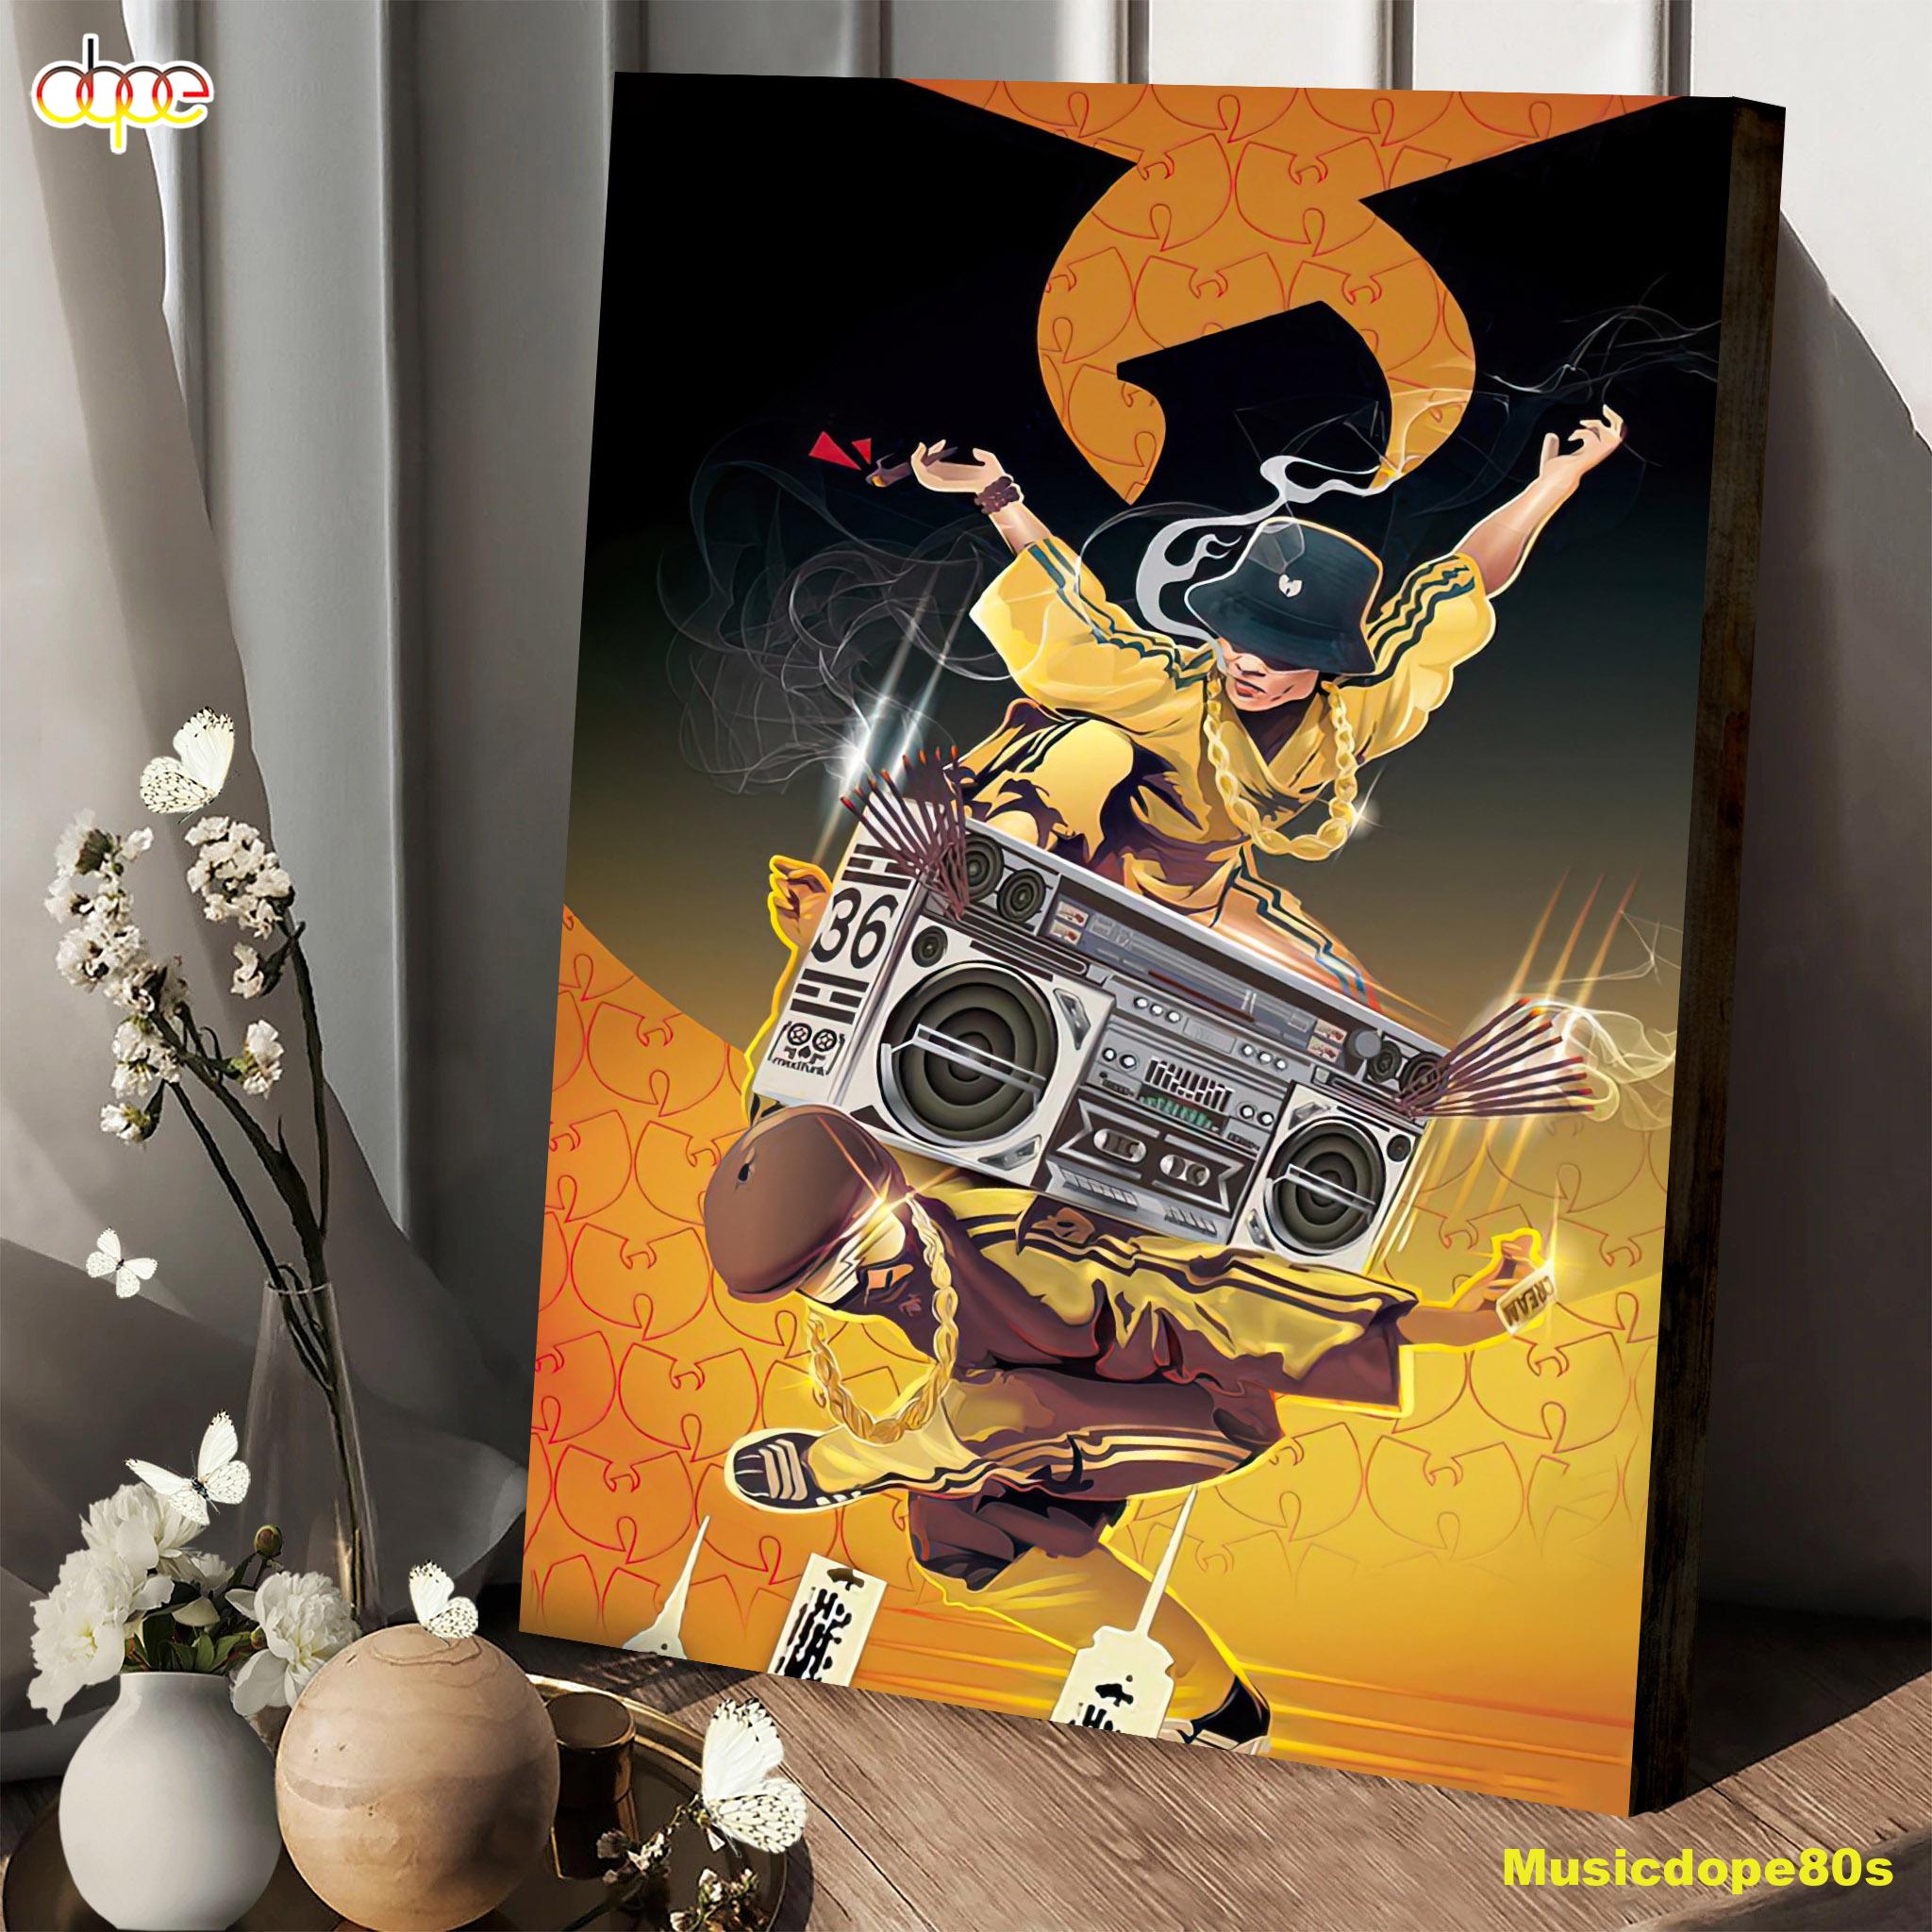 Wu-tang Clan New York State of Mind Tour 2022 Toronto Canada Poster Canvas